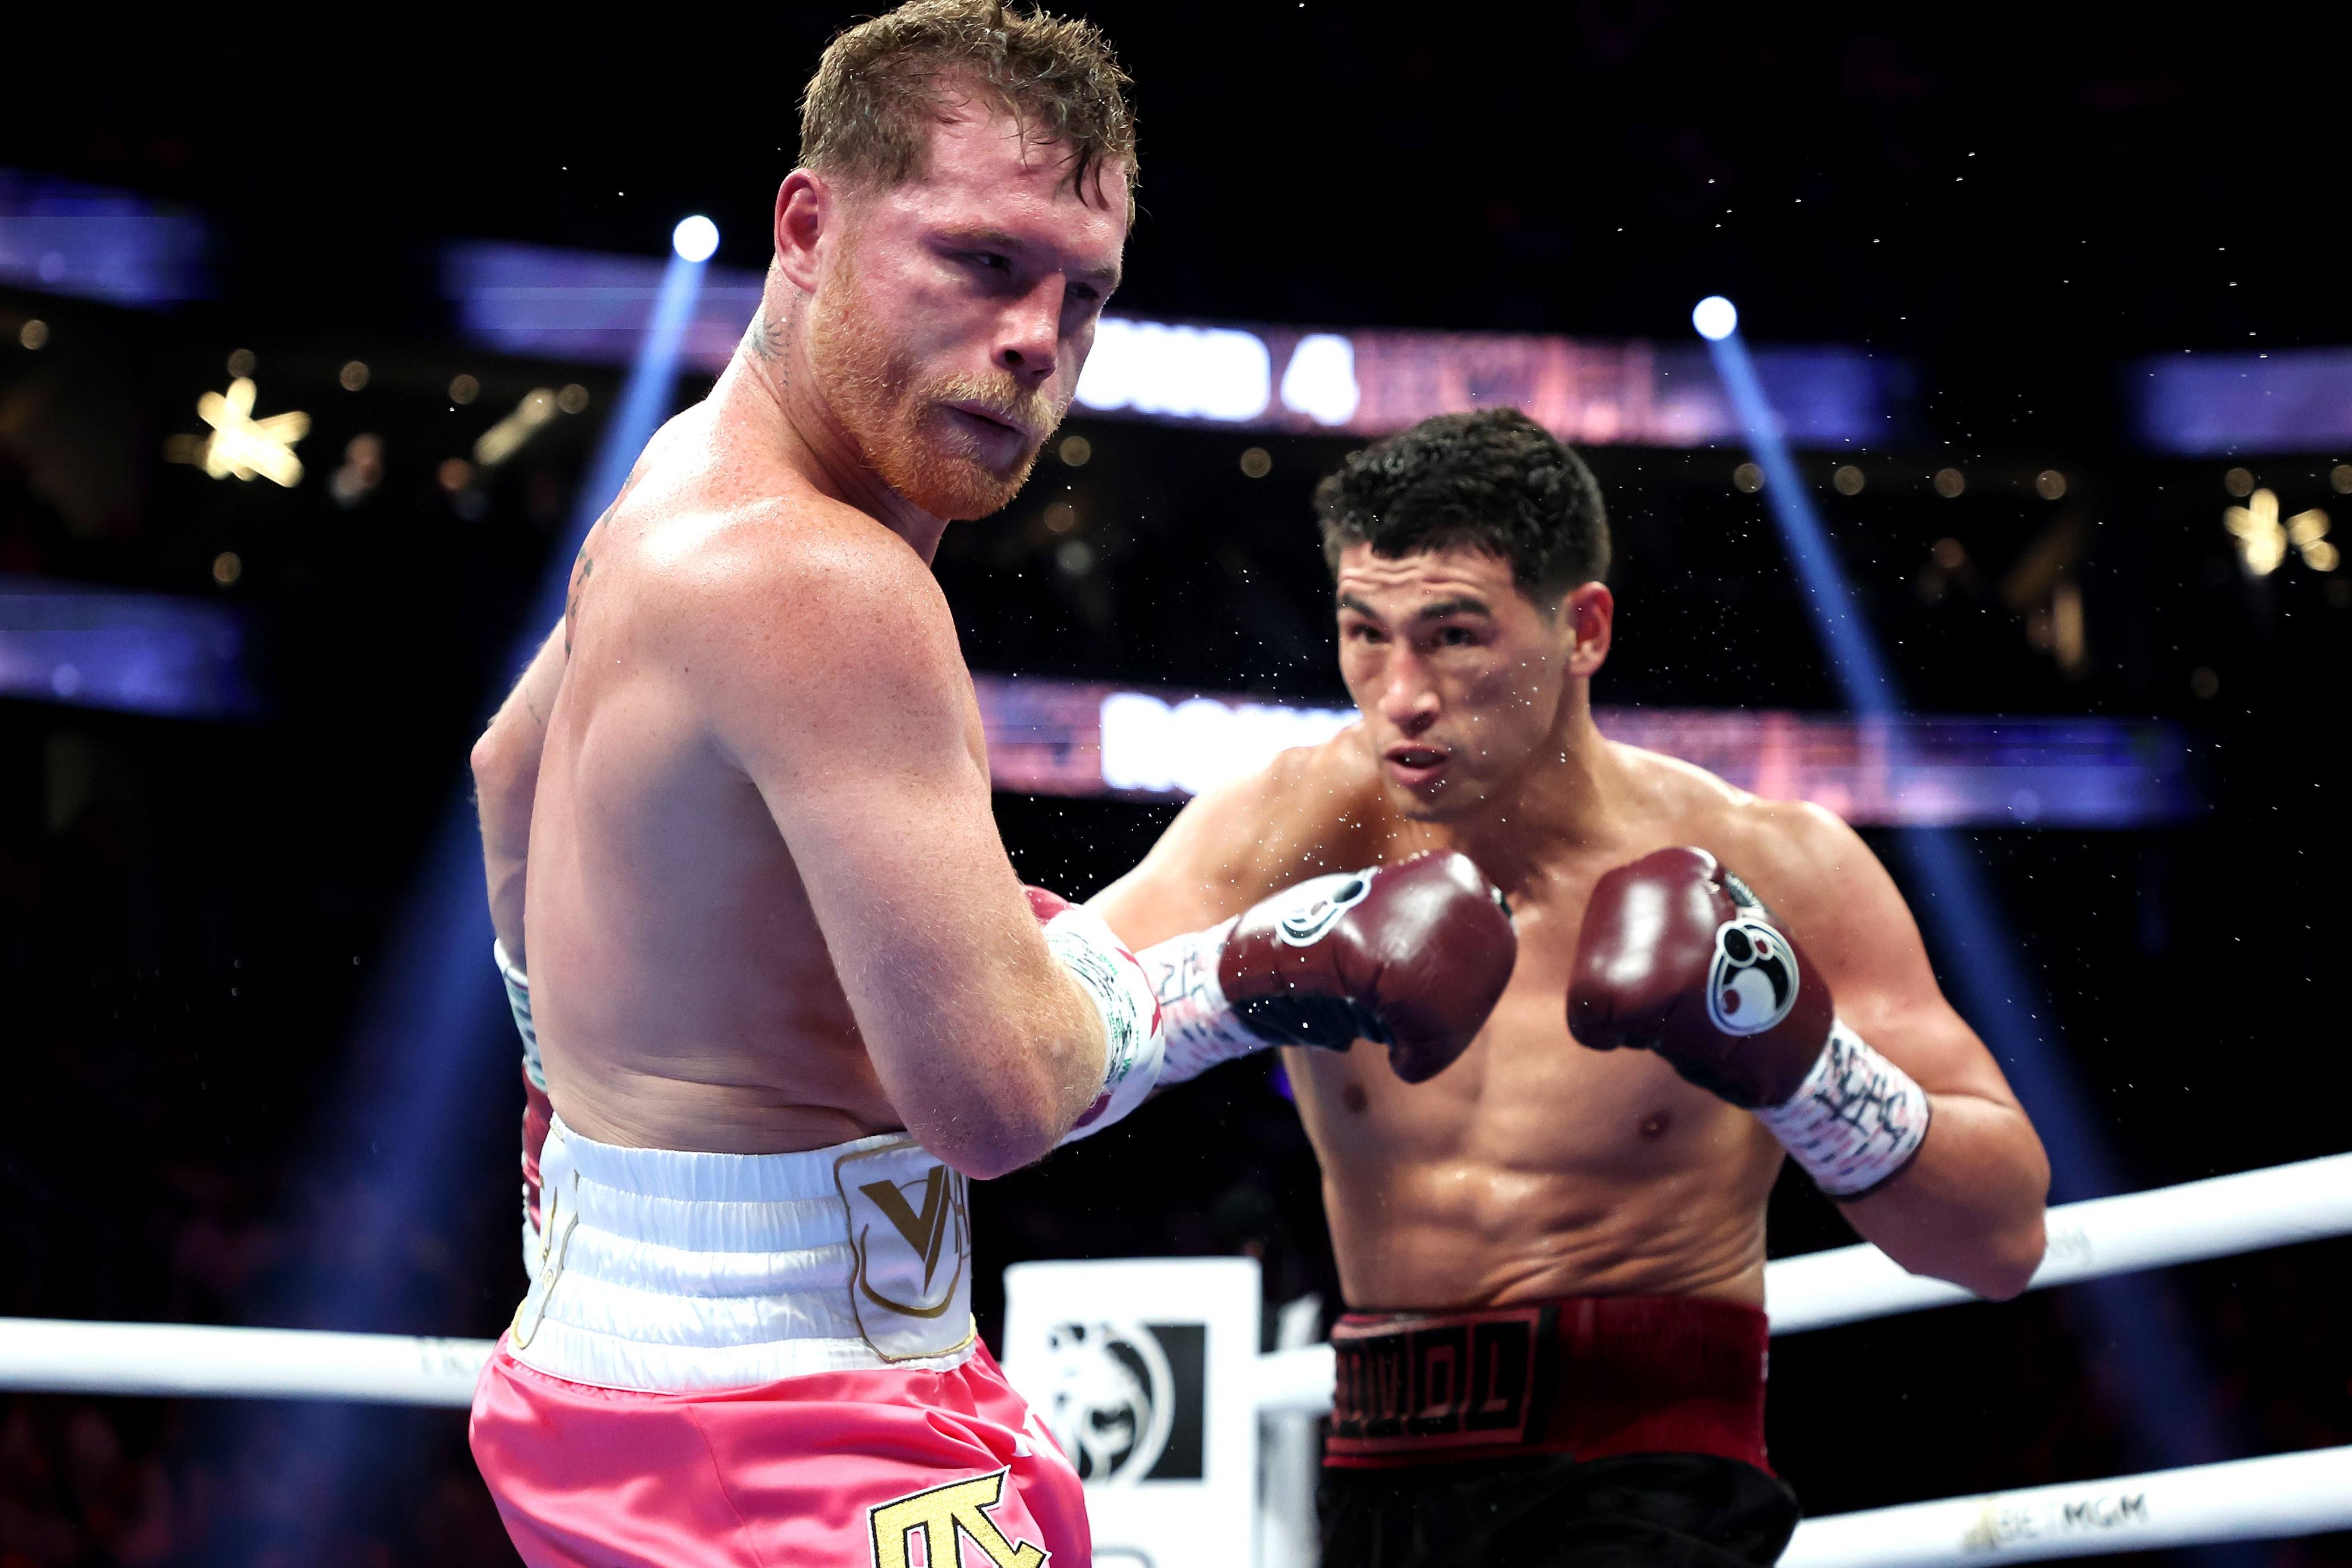 Dmitry Bivol punches Canelo Alvarez during their WBA light heavyweight title fight at T-Mobile Arena on May 7, 2022 in Las Vegas, Nevada. Photo: AFP